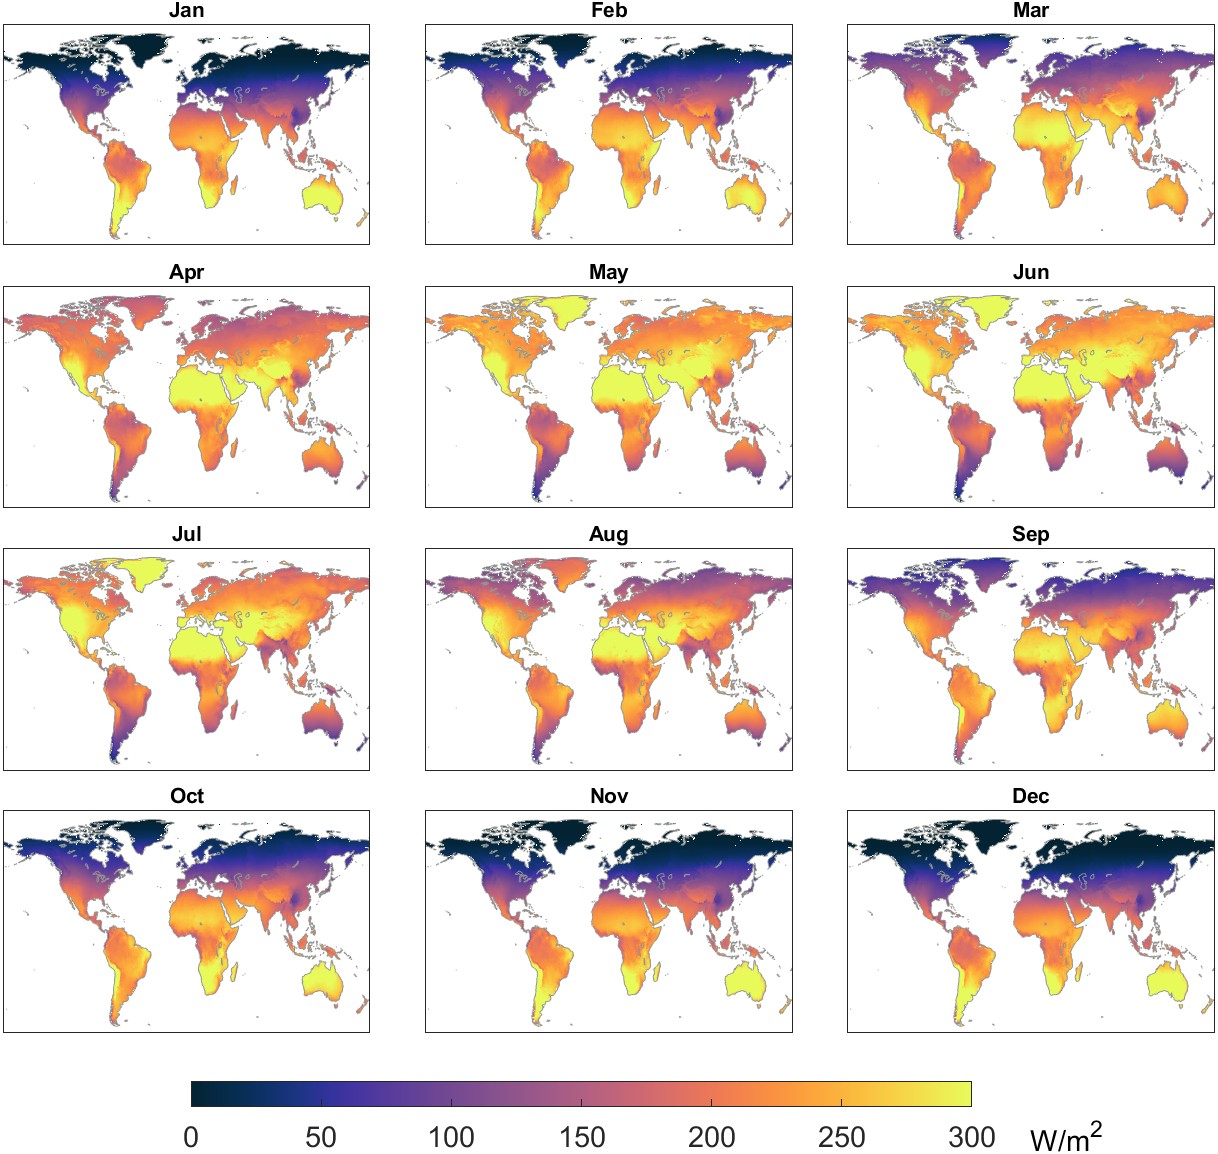 Average monthly solar radiation over the period 2000 to 2019, from the ERA5 model